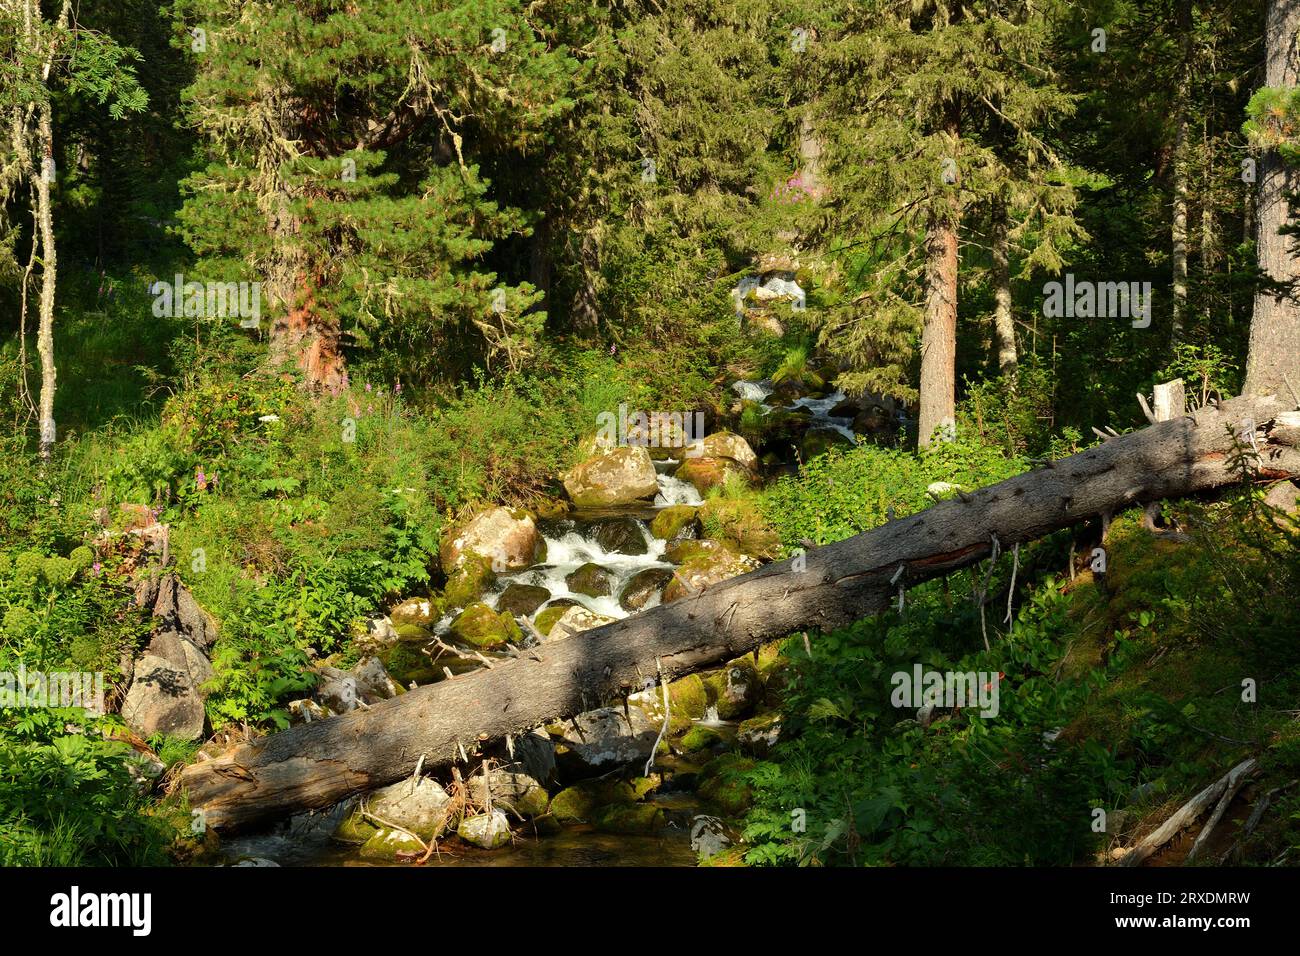 A view from above on the bed of a stormy stream with stones and fallen trees in the shade of the setting sun flowing through the coniferous forest on Stock Photo